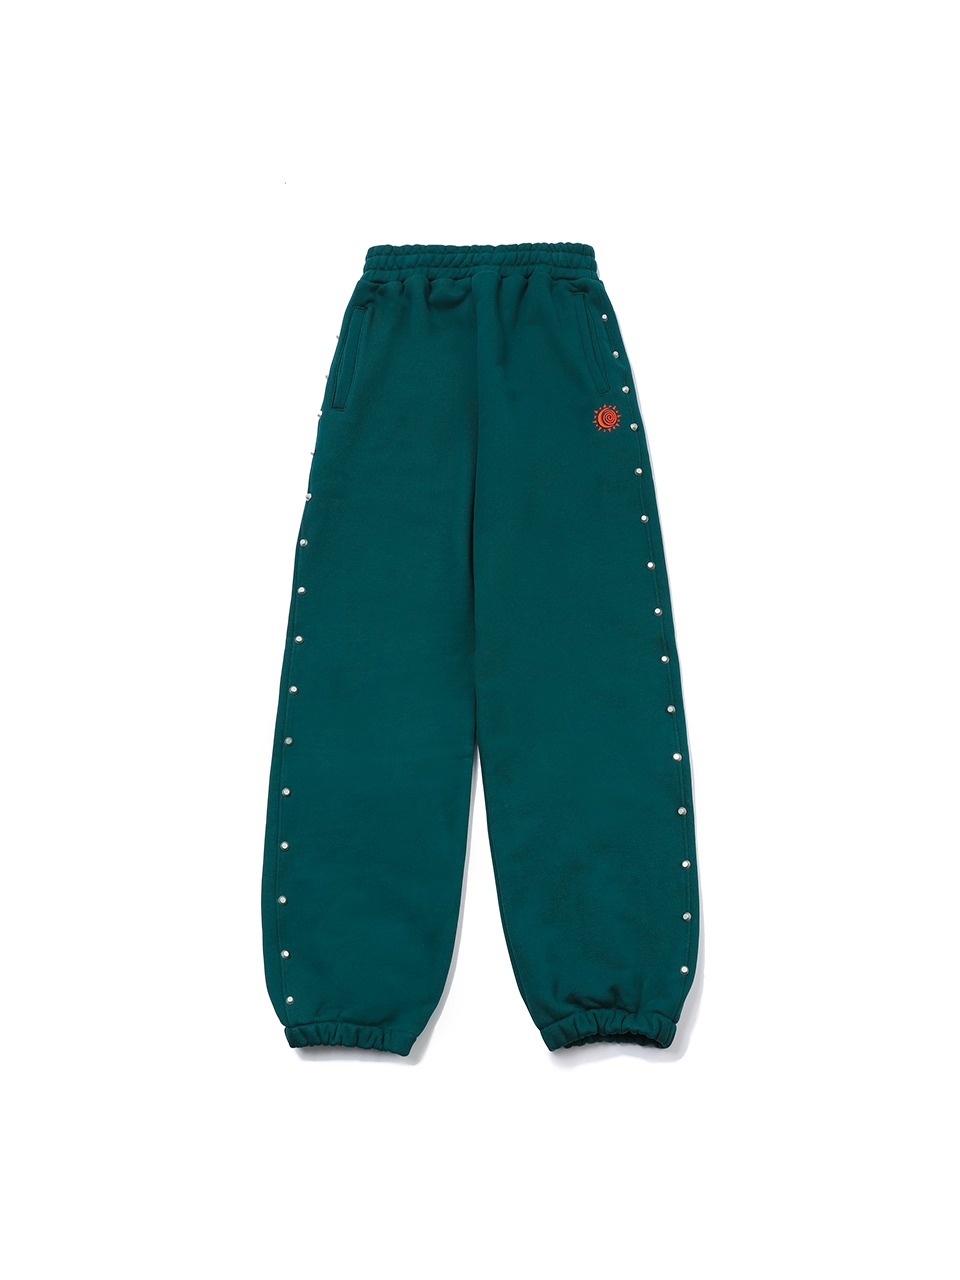 WESKEN - AZTEC SYMBOL EMBROIDERY STUDDED SWEAT PANTS (GREEN)